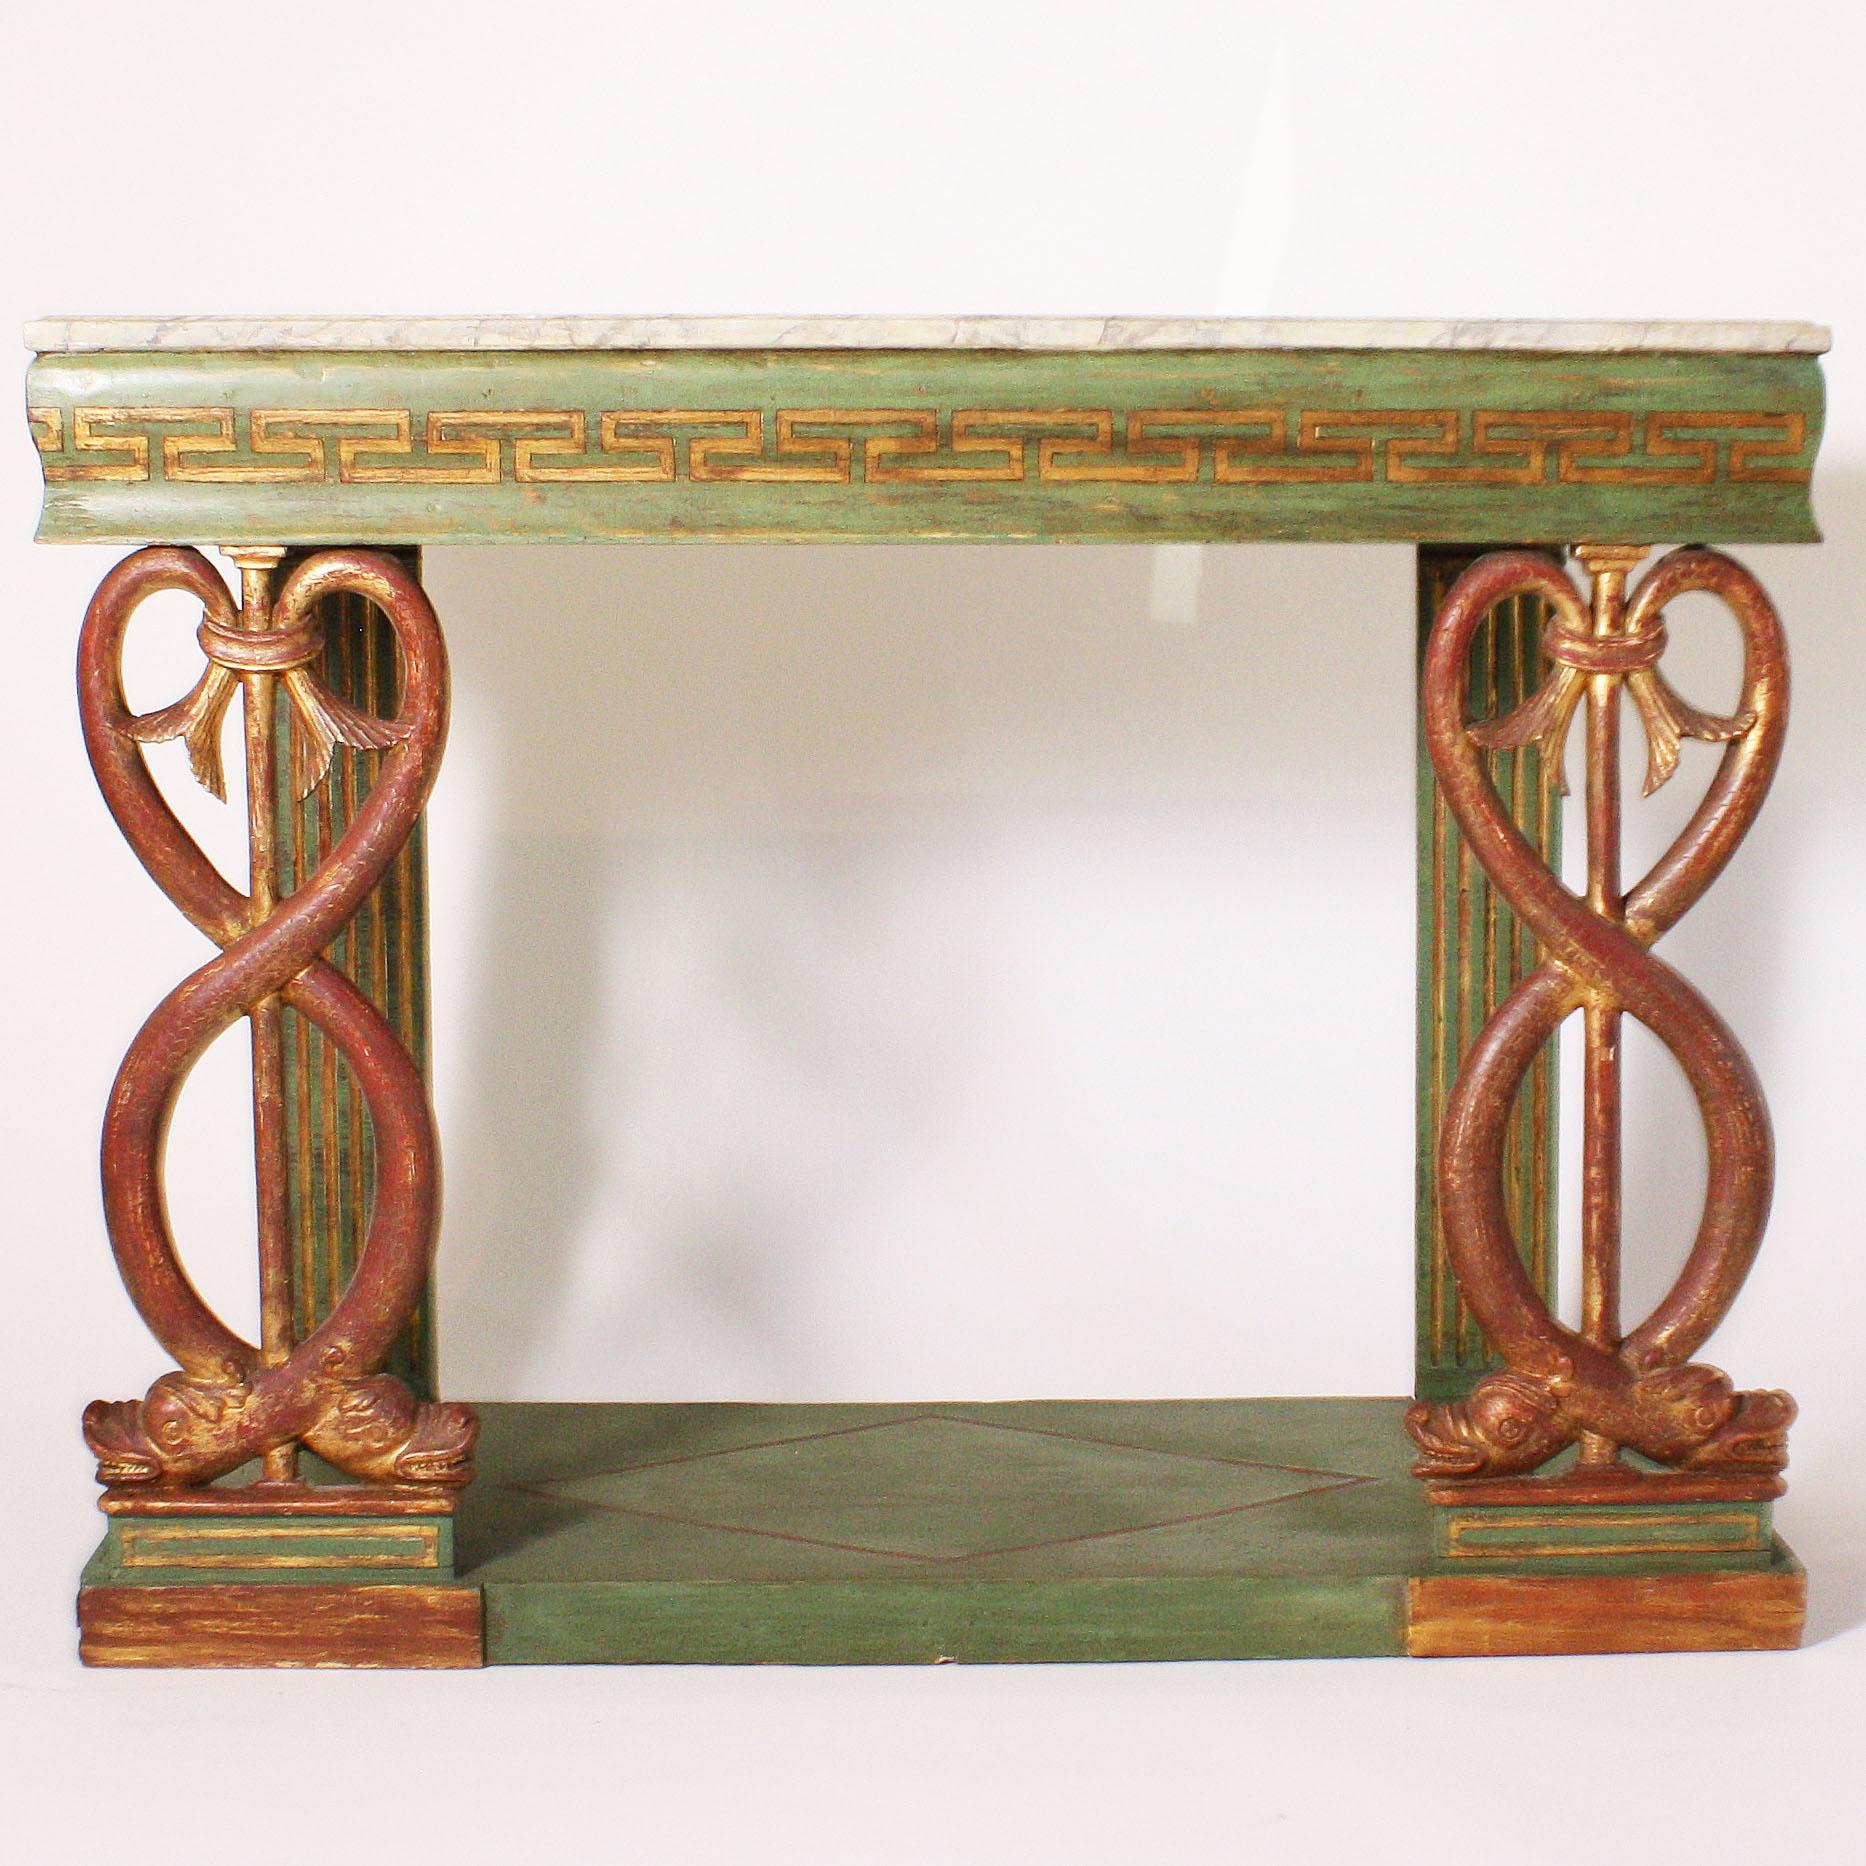 French early 19th century hand painted neoclassical console with faux marbre.
$16,500.